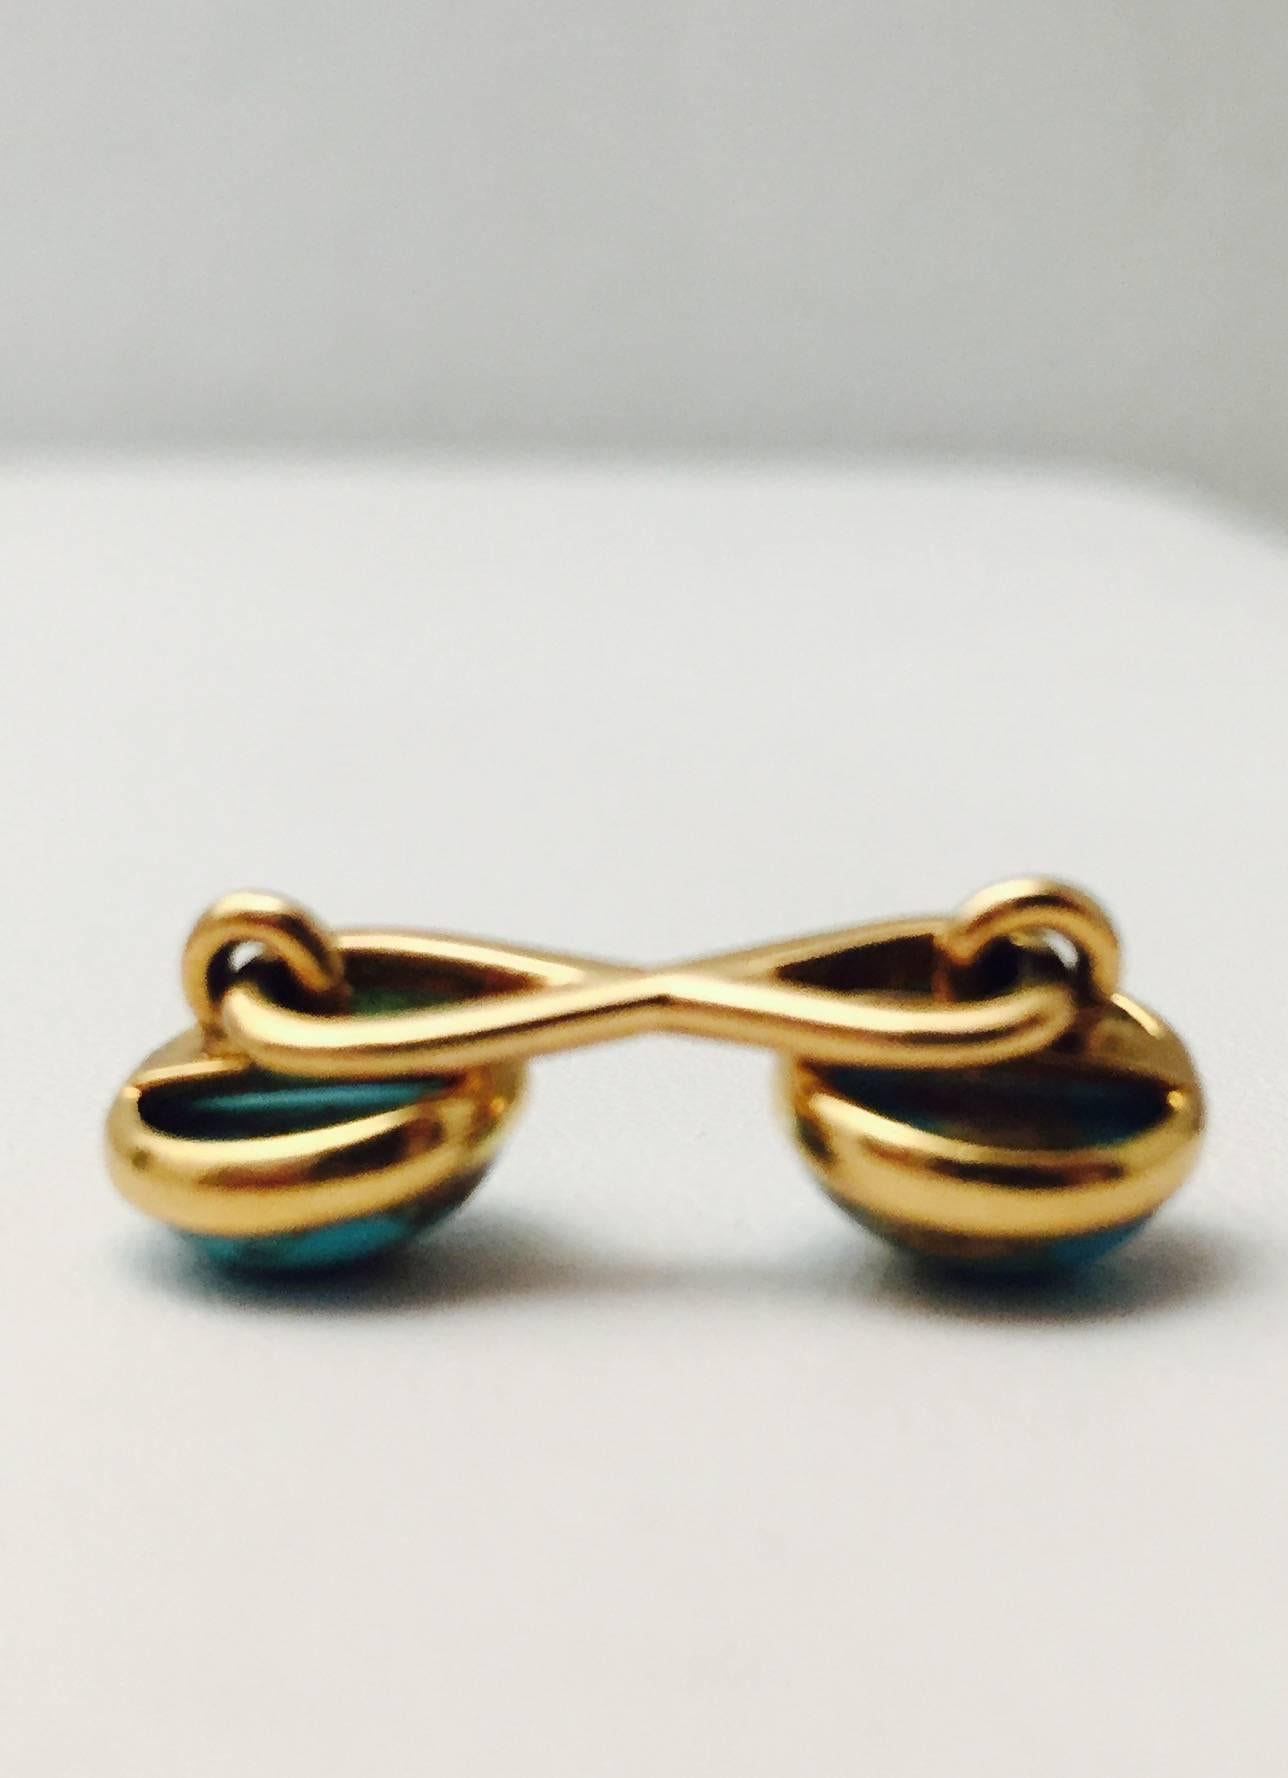 The perfect gift for Dads and Grads! A rare pair of 18 karat yellow gold Infinity link cufflinks, masterfully crafted by Tiffany & Co.  Each end features a bezel set, 10mm turquoise with beautiful matrix.  Highly prized by collectors world wide.